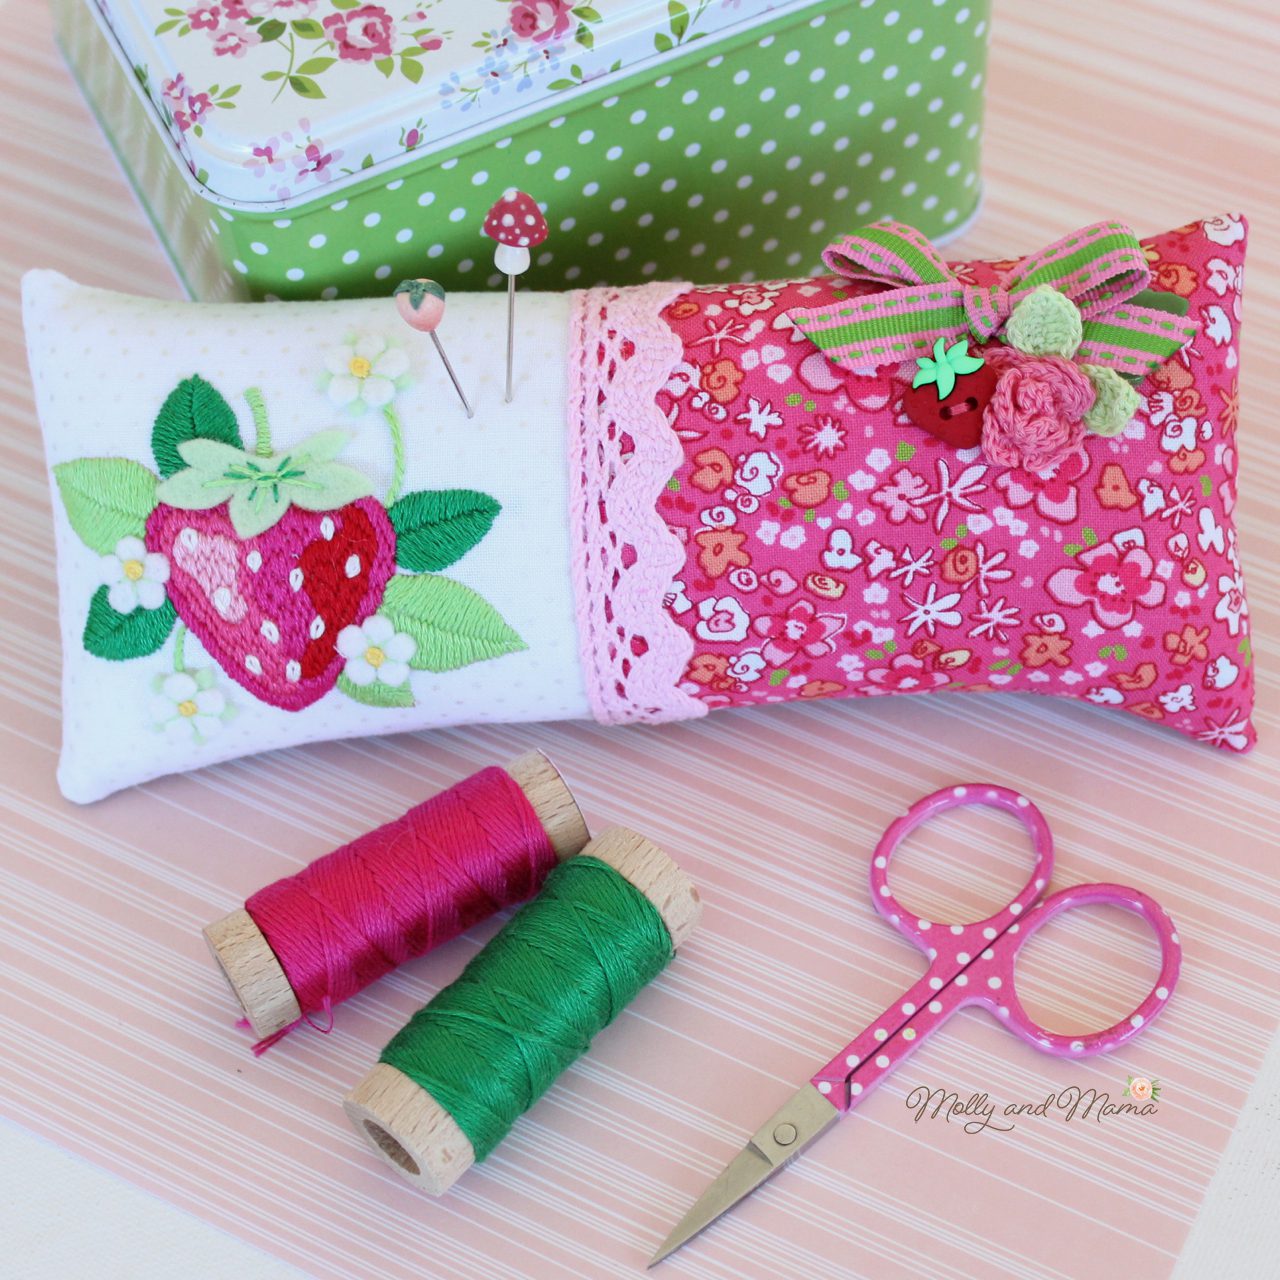 Fabric, Patterns and Projects in July